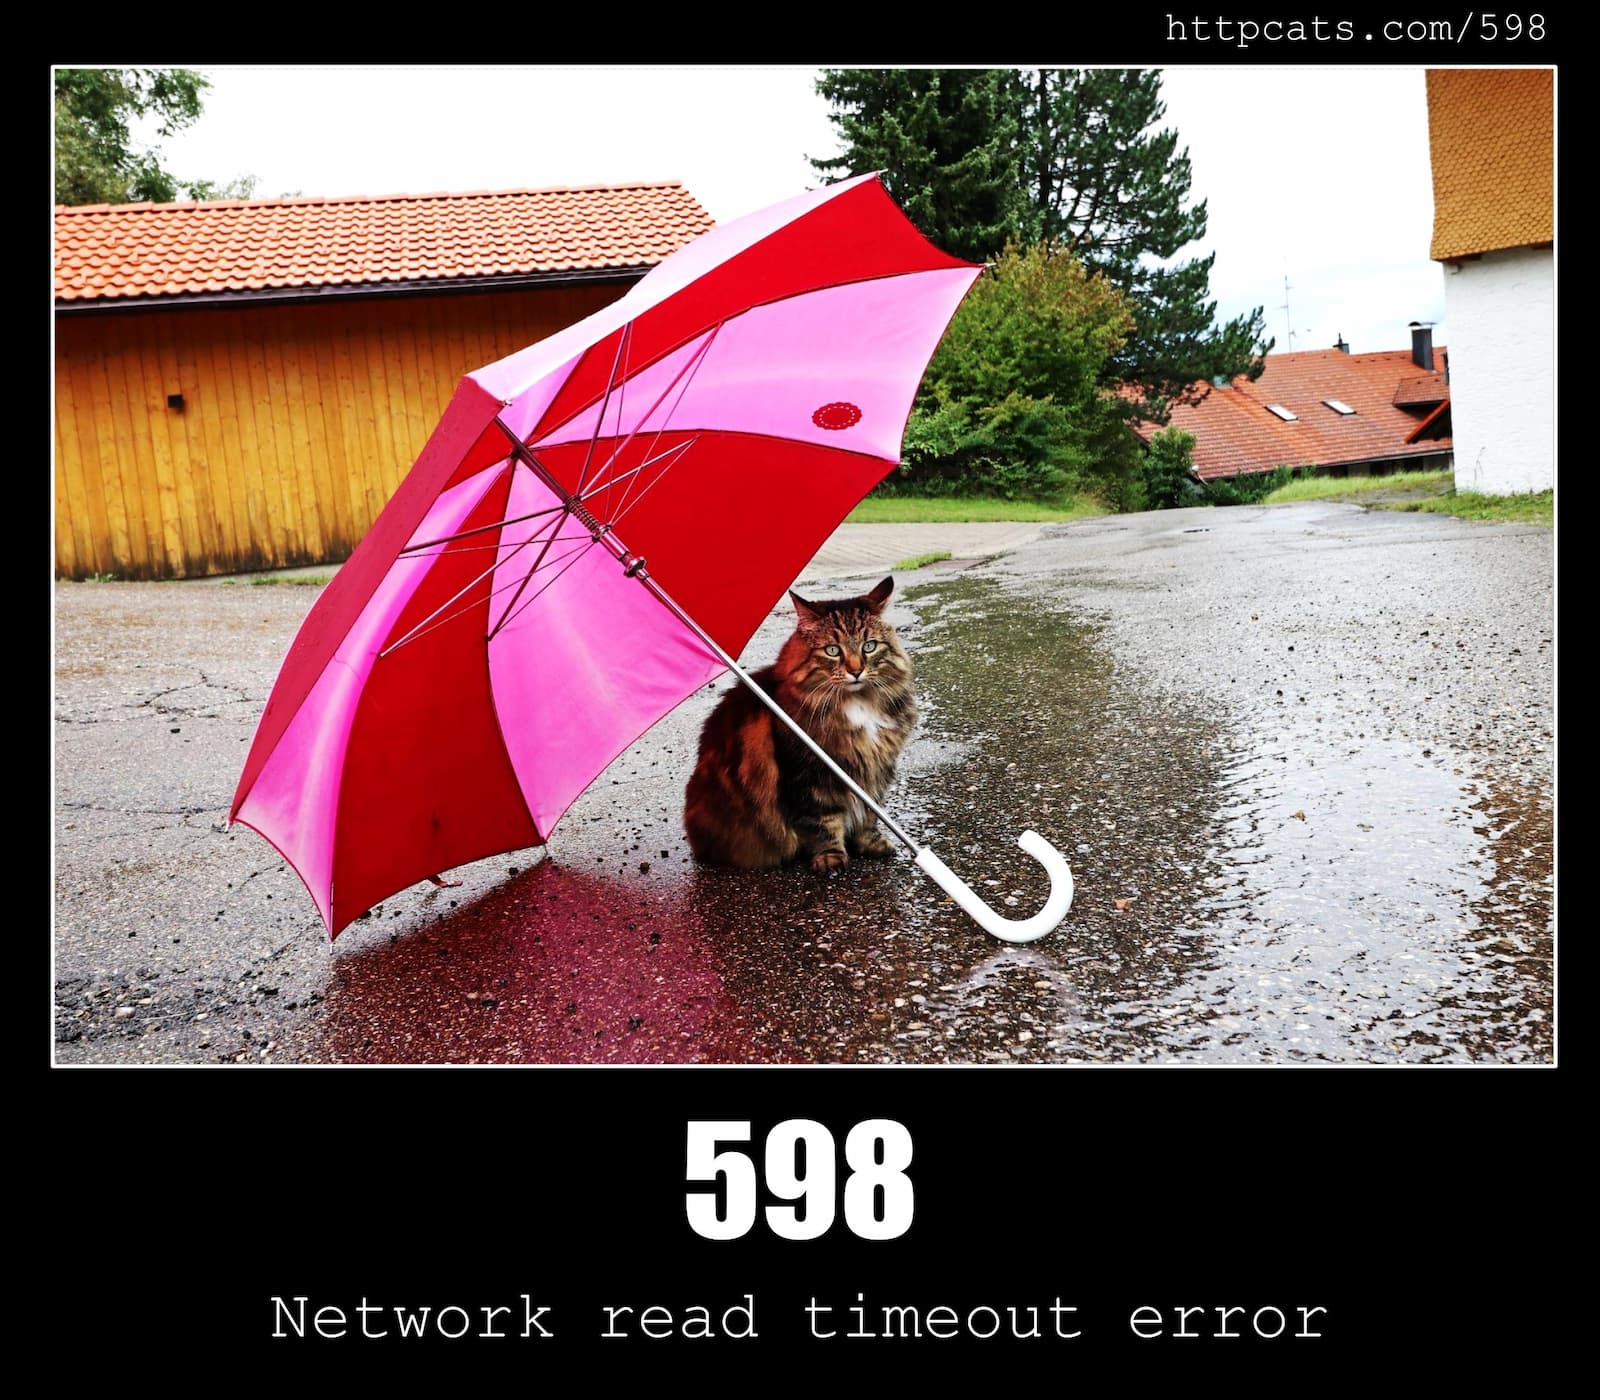 HTTP Status Code 598 Network read timeout error & Cats